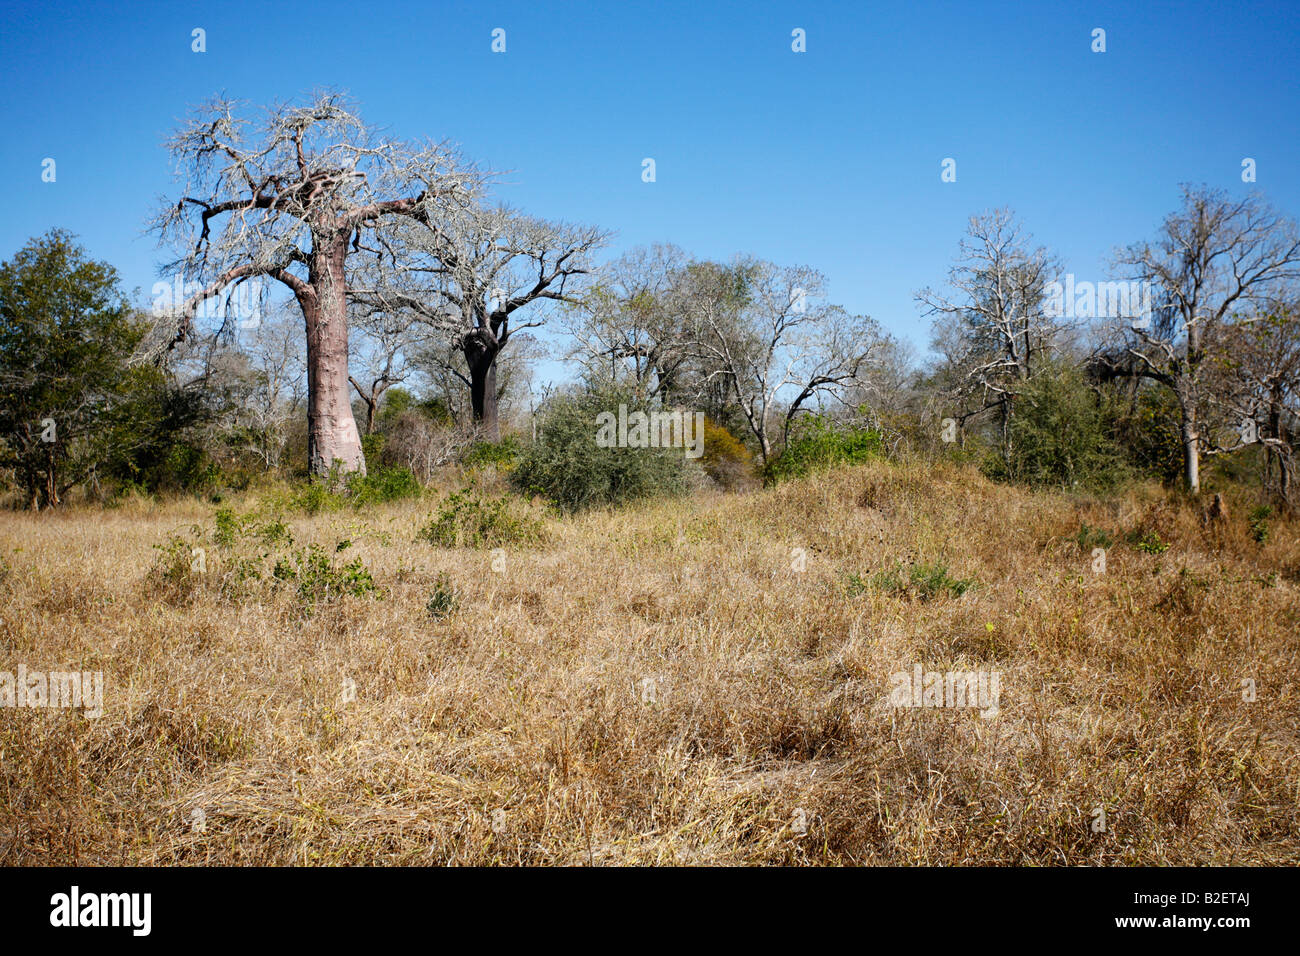 Zinave National park landscape showing the general vegetation and a baobab tree in the distance Stock Photo